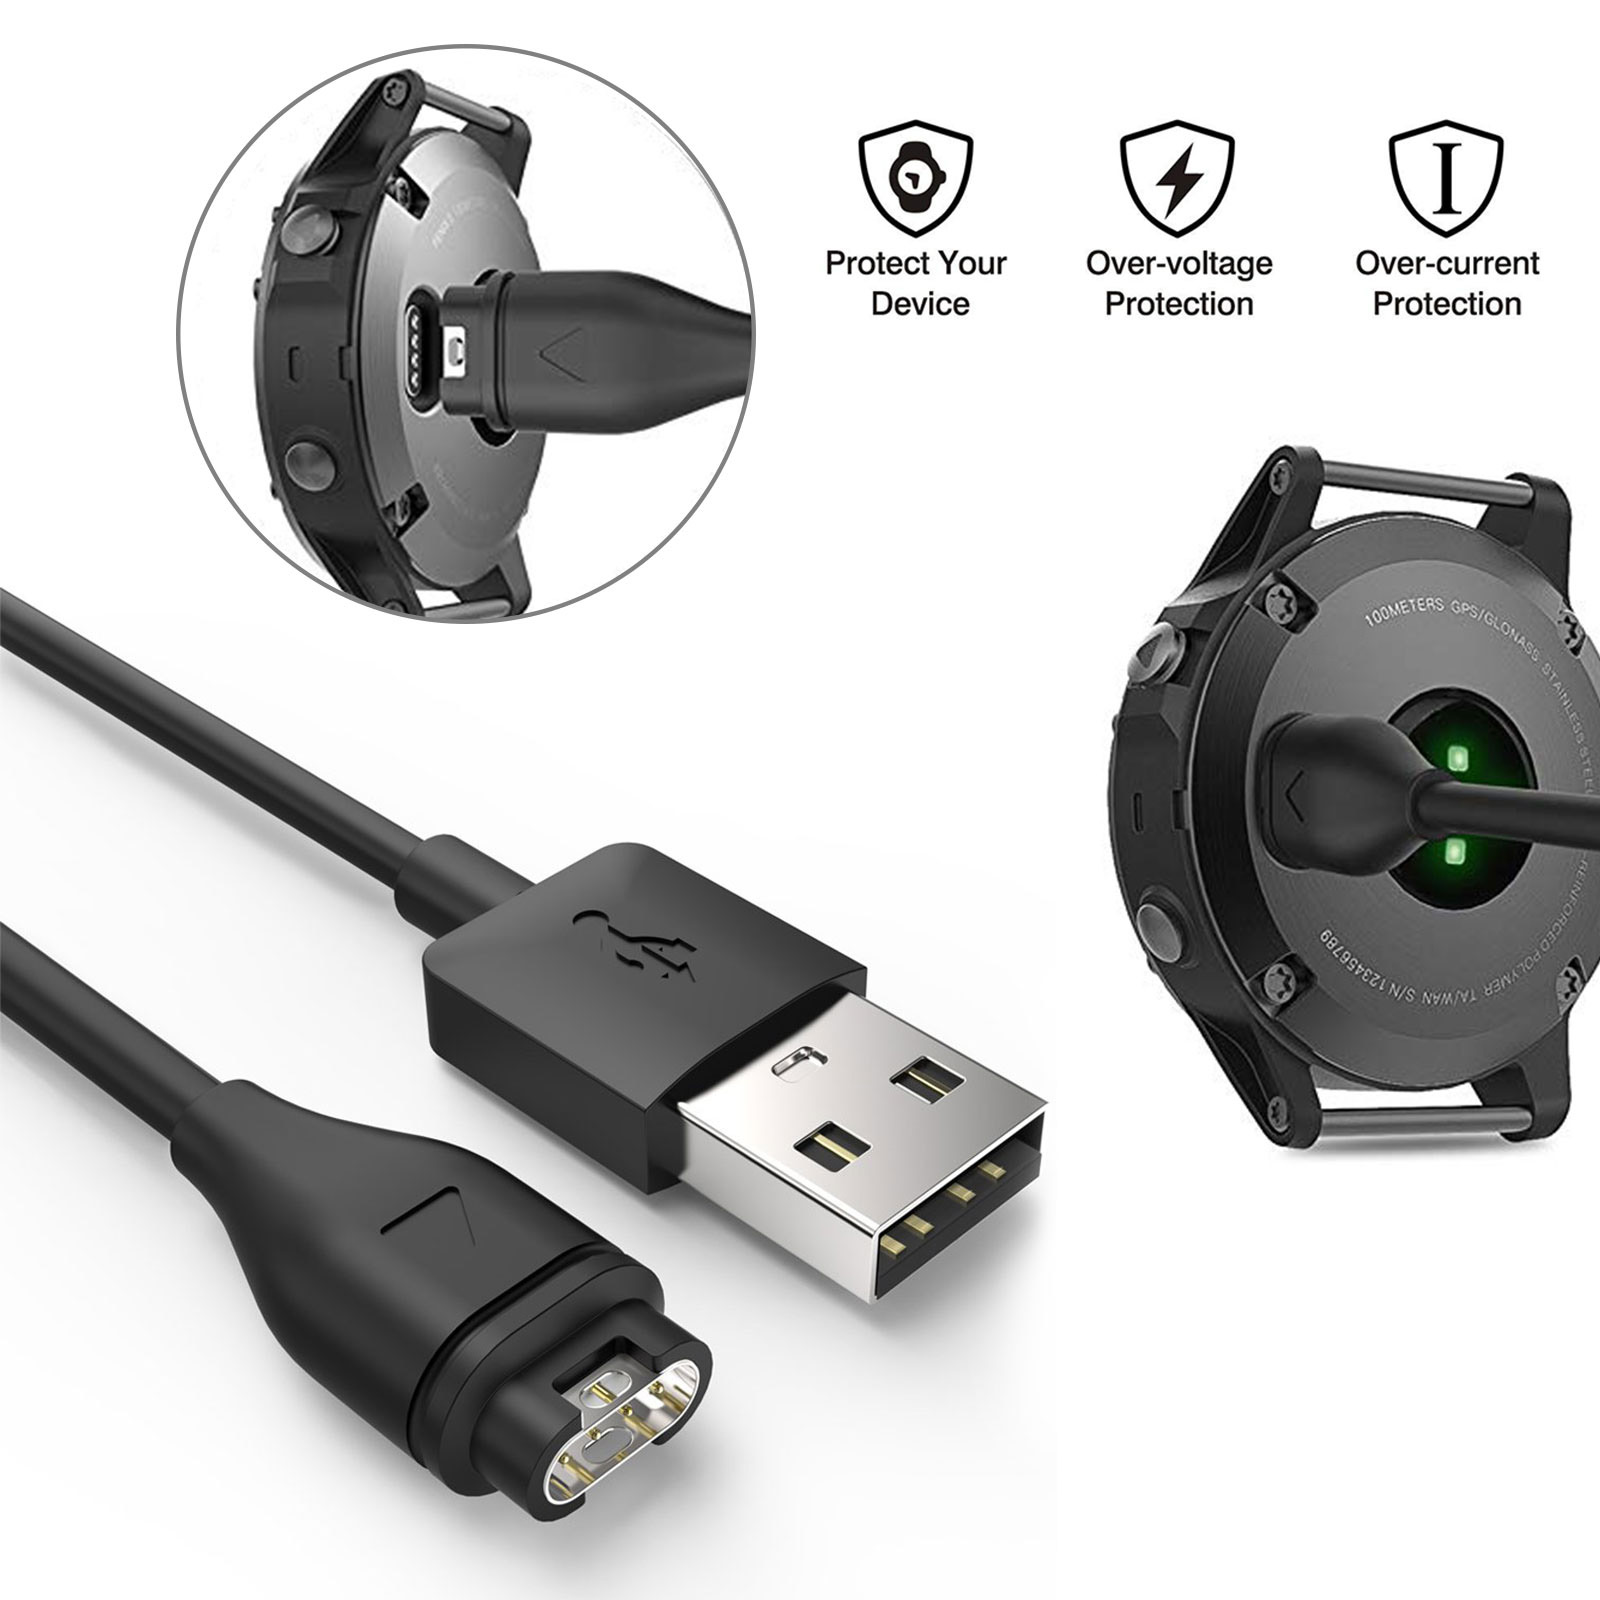 AM_ EG_ REPLACEMENT CHARGING CABLE USB CHARGER DOCK FOR GARMIN FENIX 5/5S/5X PLU 